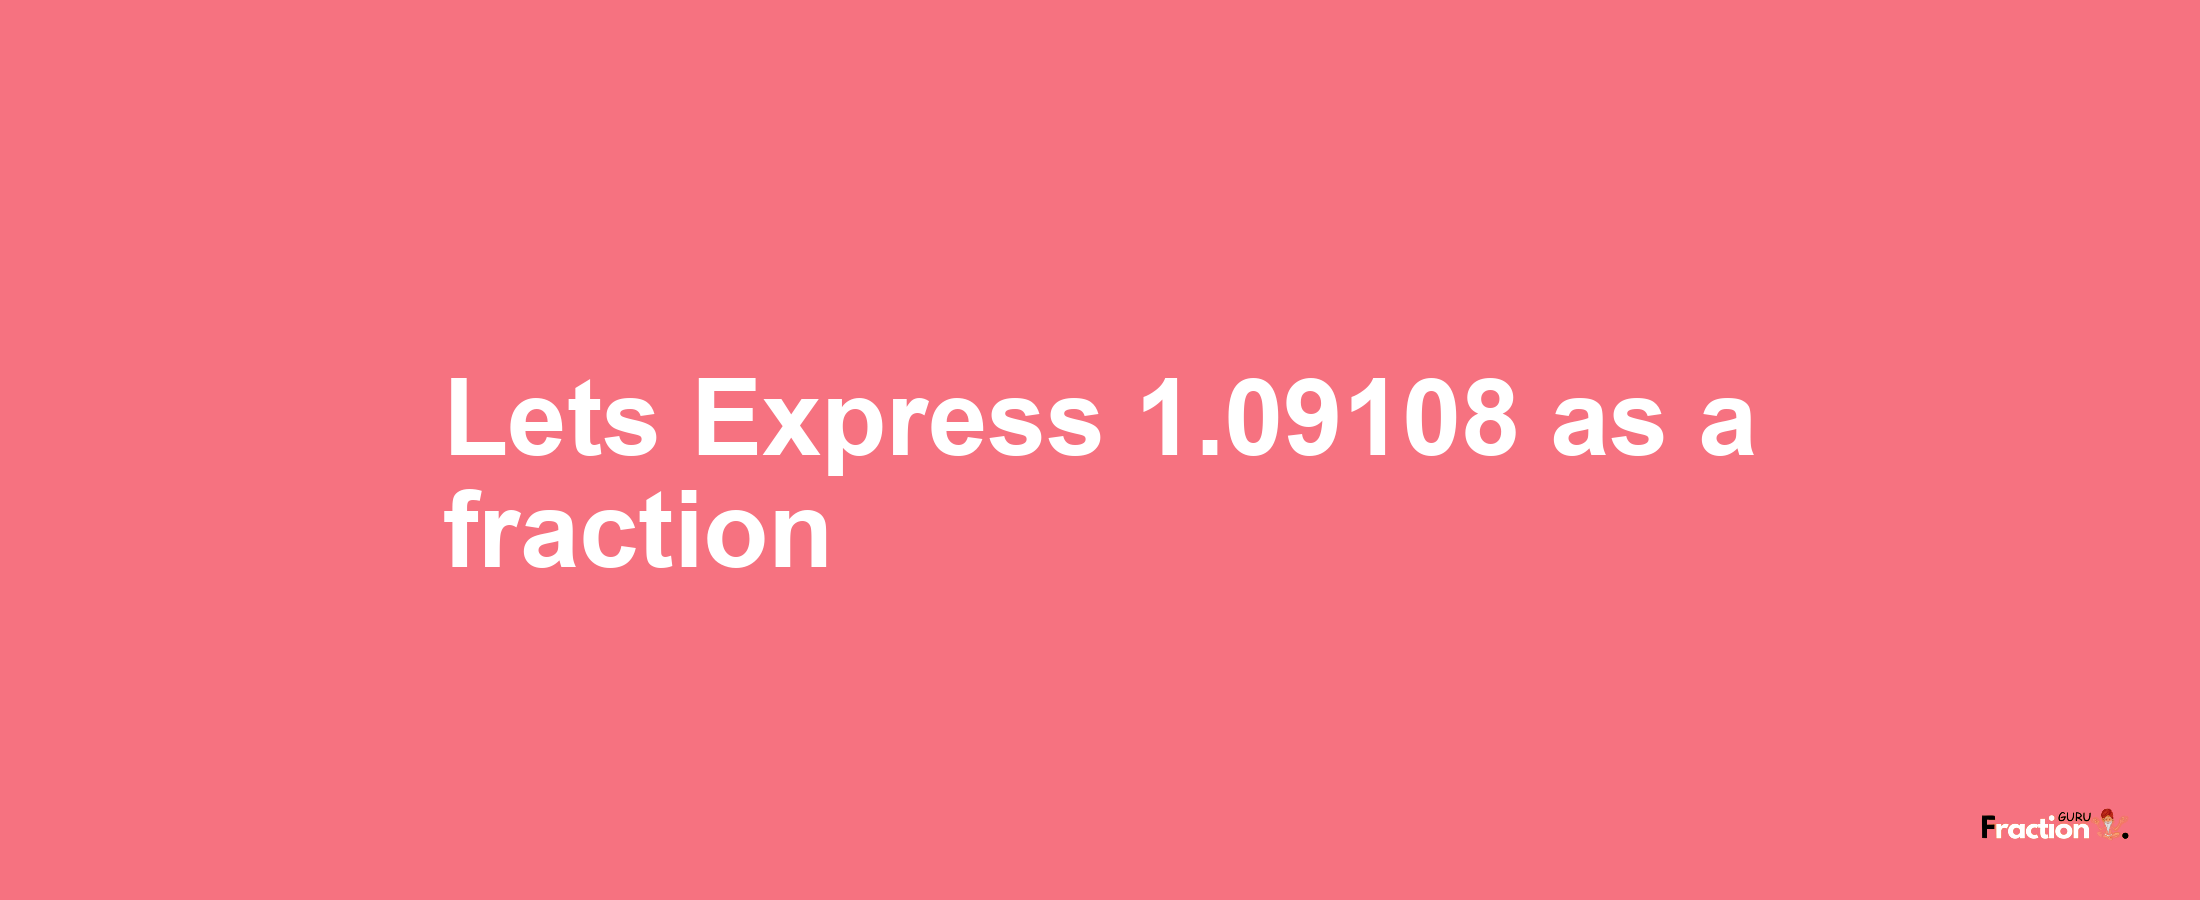 Lets Express 1.09108 as afraction